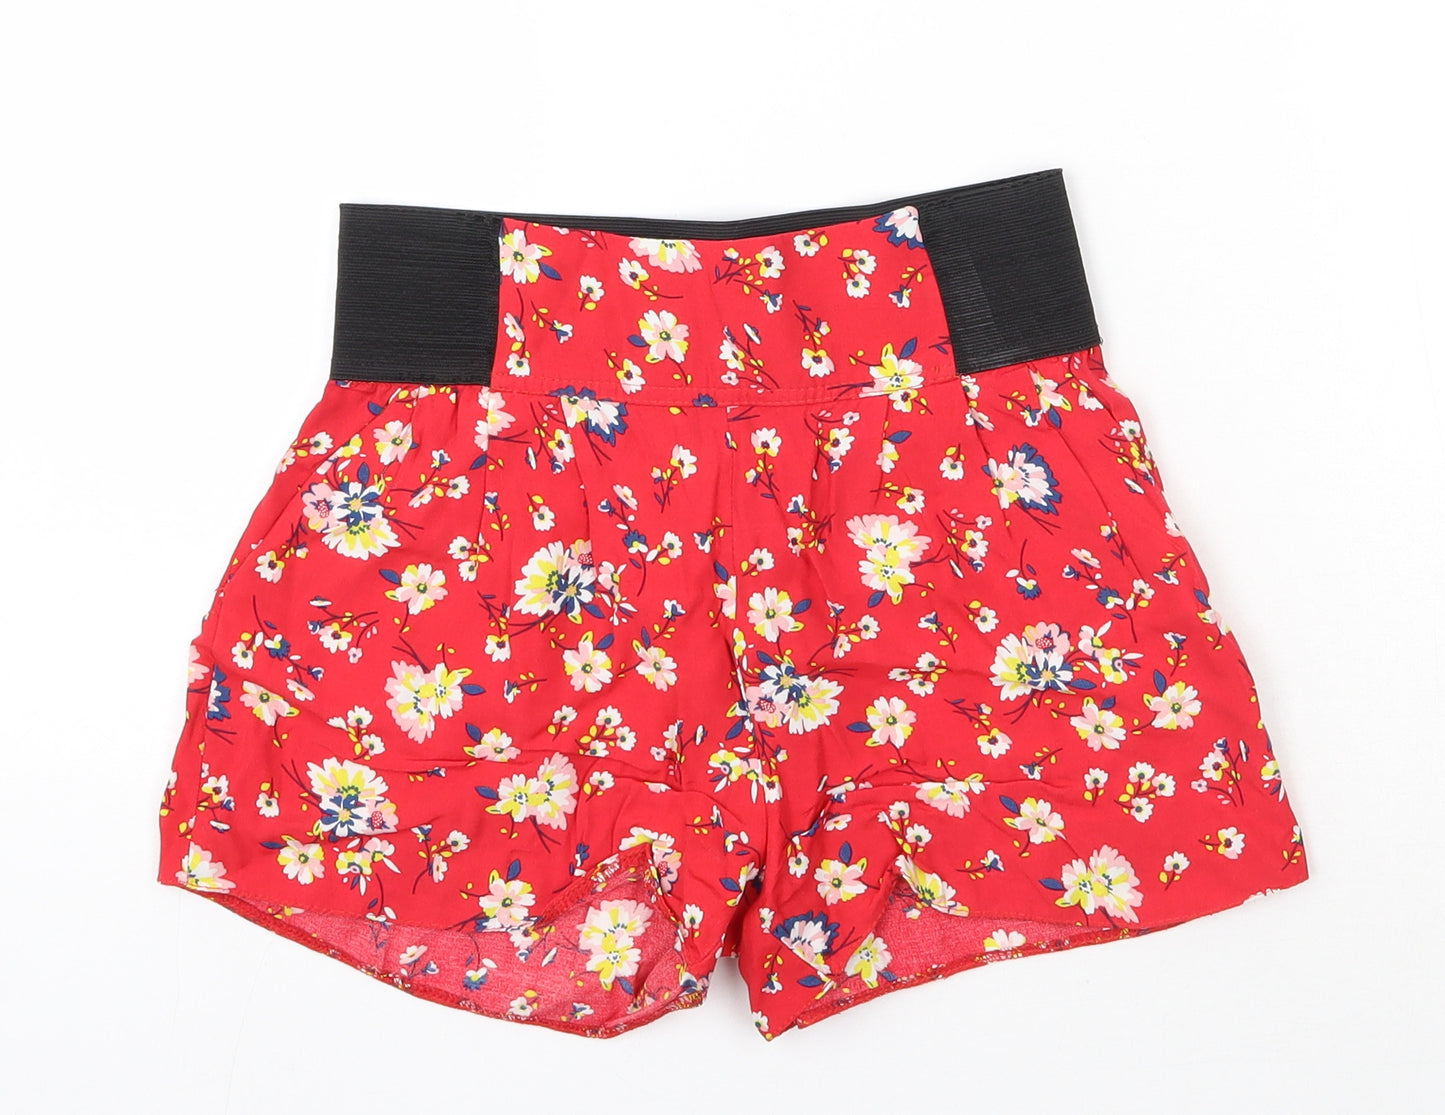 New Look Girls Red Floral Polyester Paperbag Shorts Size 11 Years  Regular